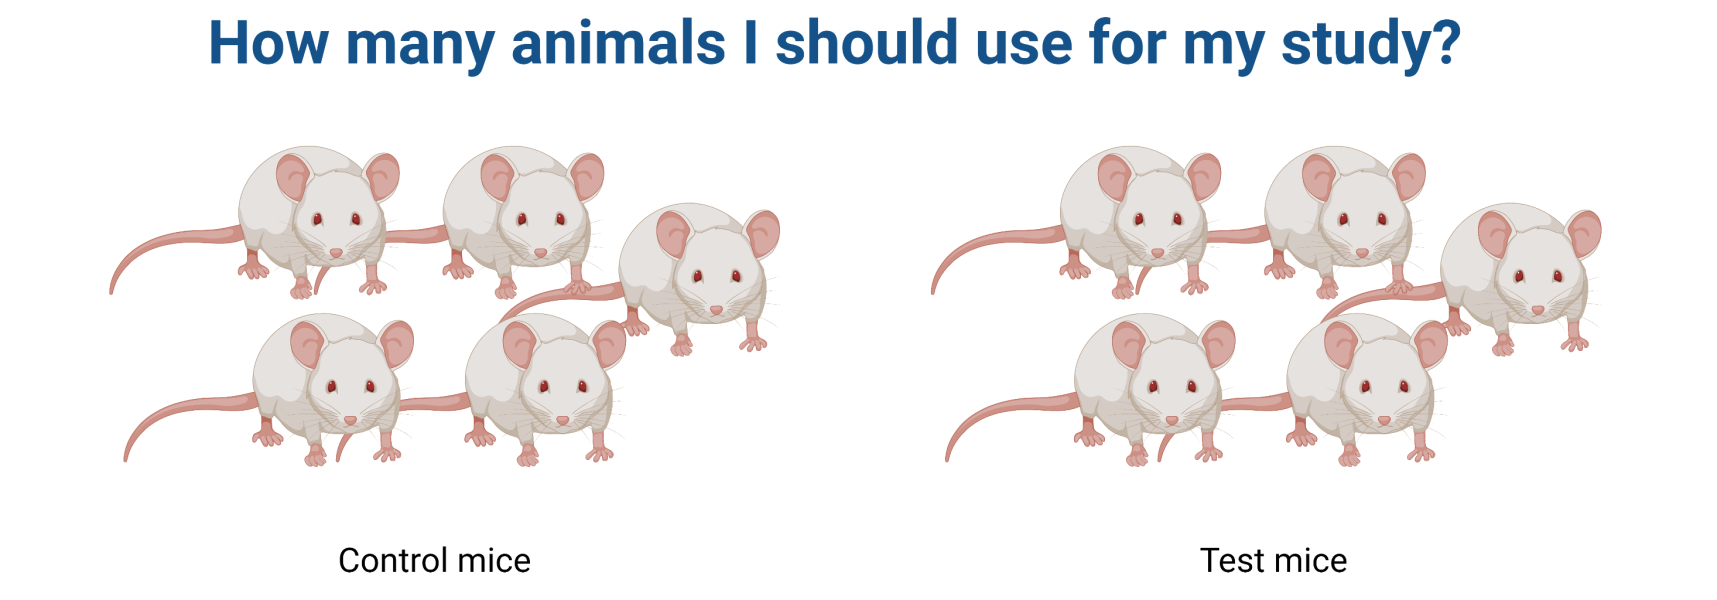 How many animals I should use for my study?